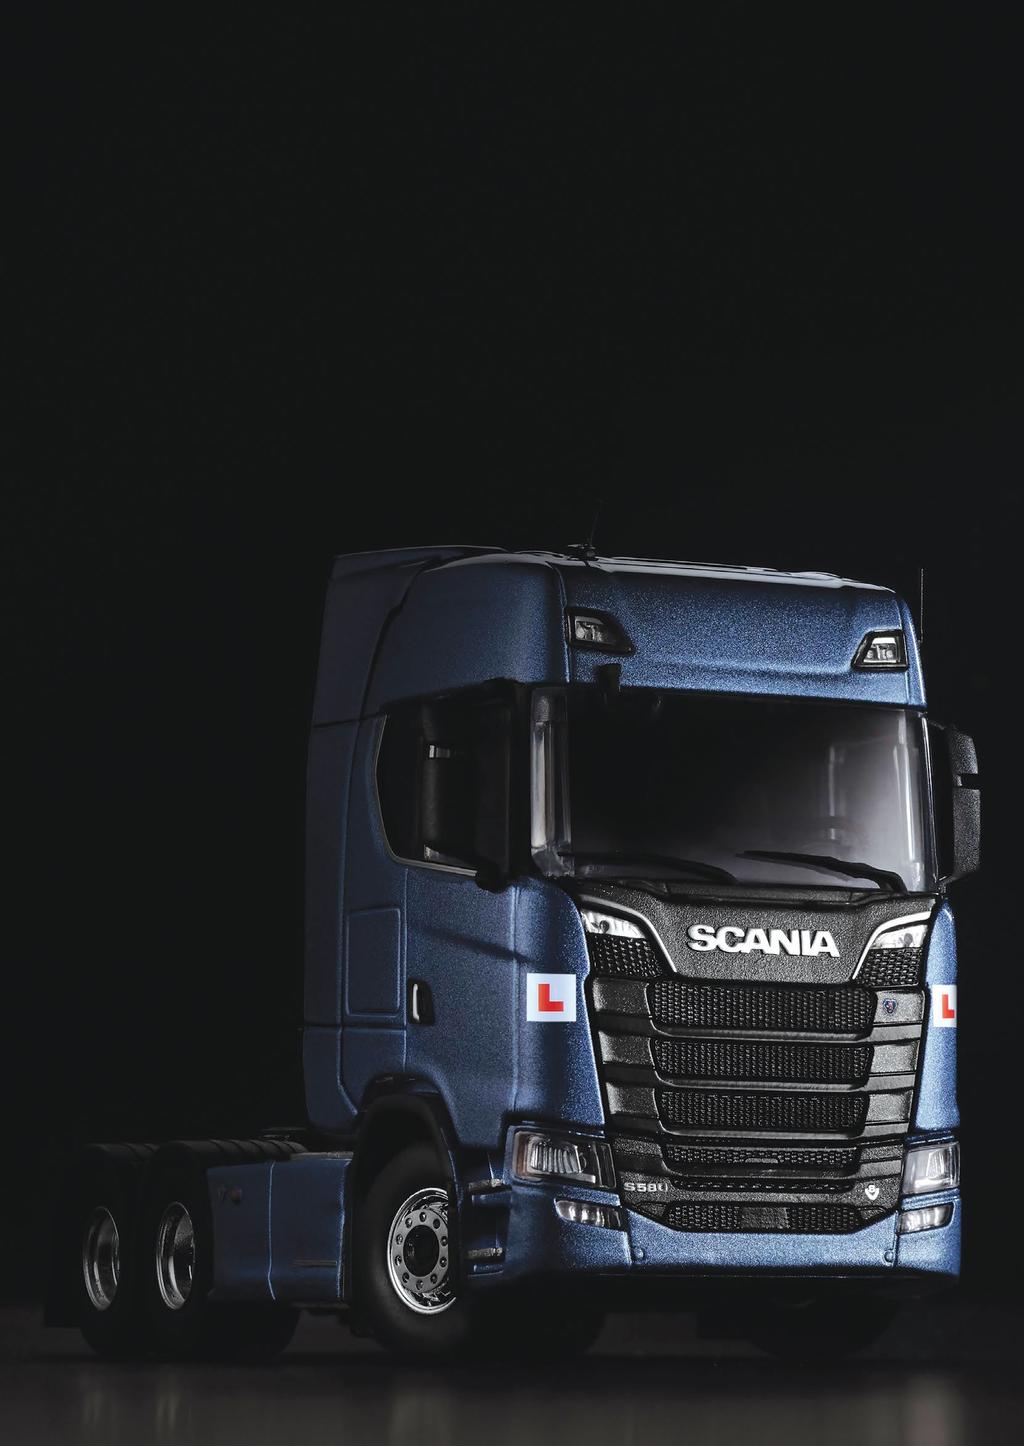 How to enrol Scania are a reliable, reputable and affordable training provider.